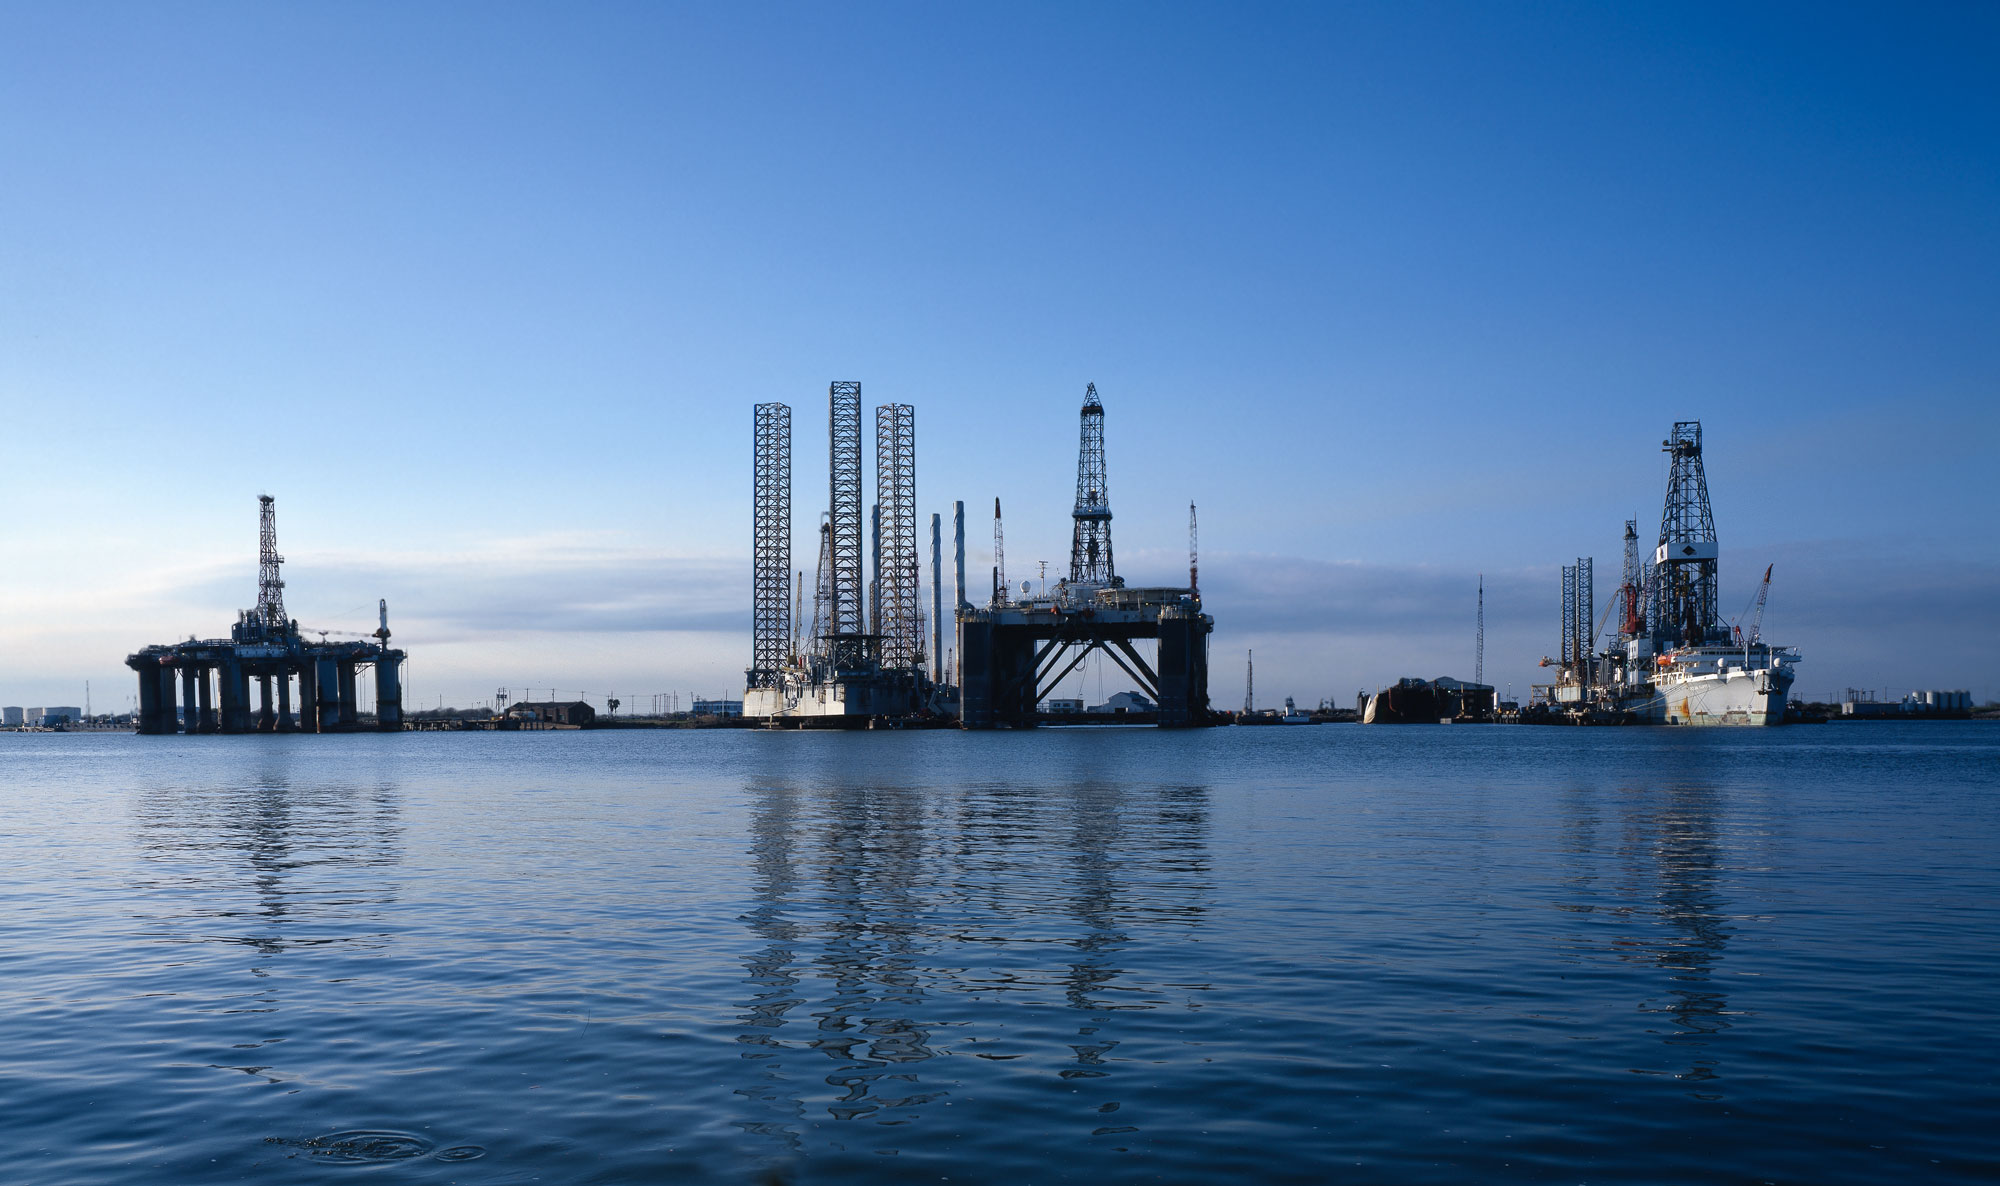 Photograph of oil rigs in the water off Galveston, Texas.